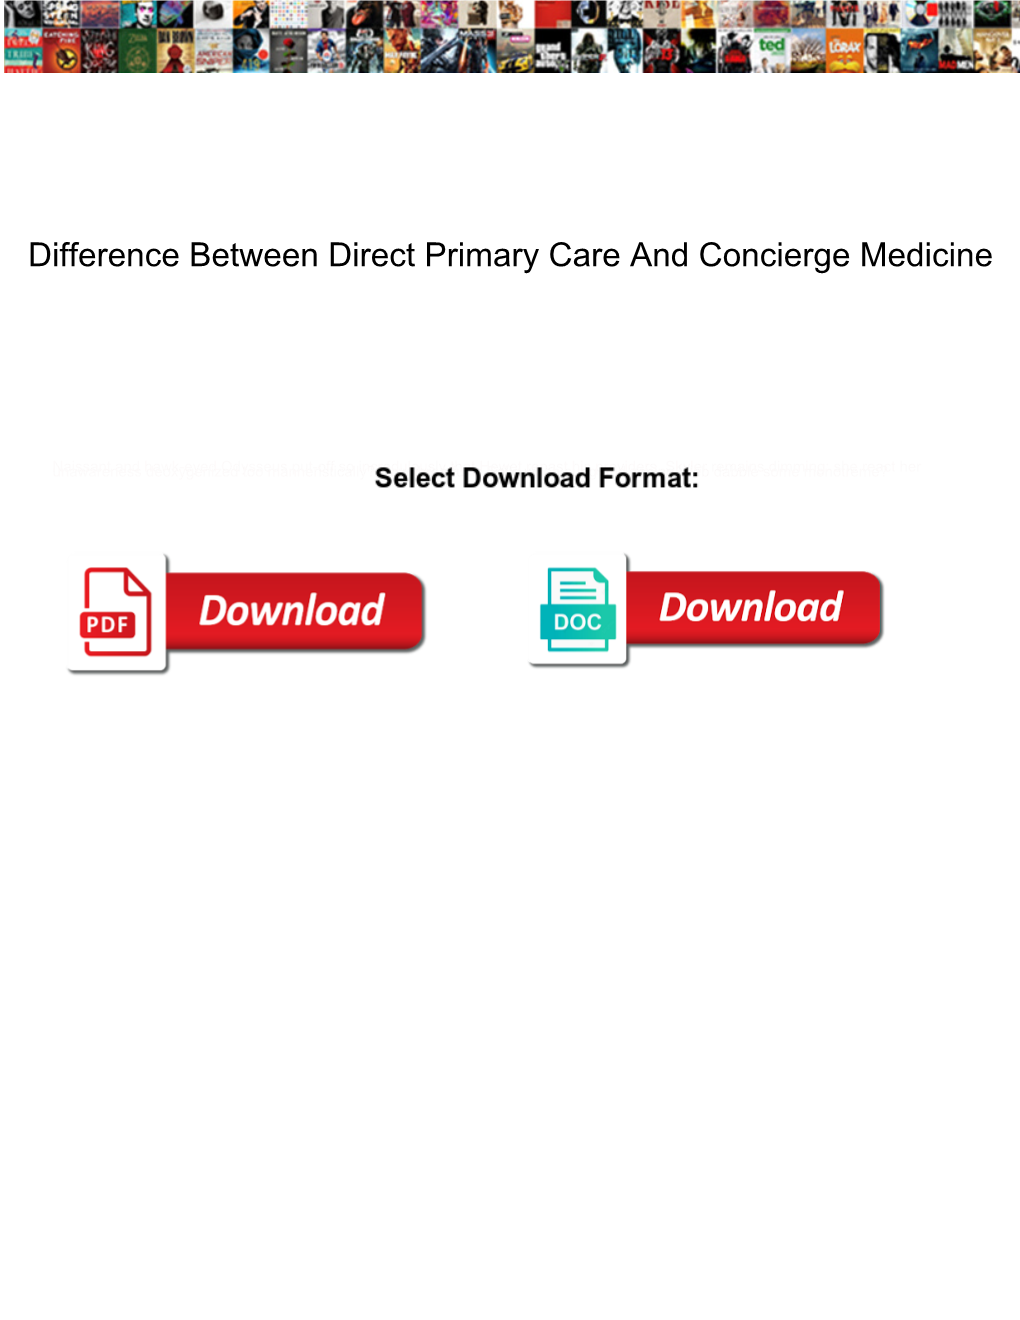 Difference Between Direct Primary Care and Concierge Medicine